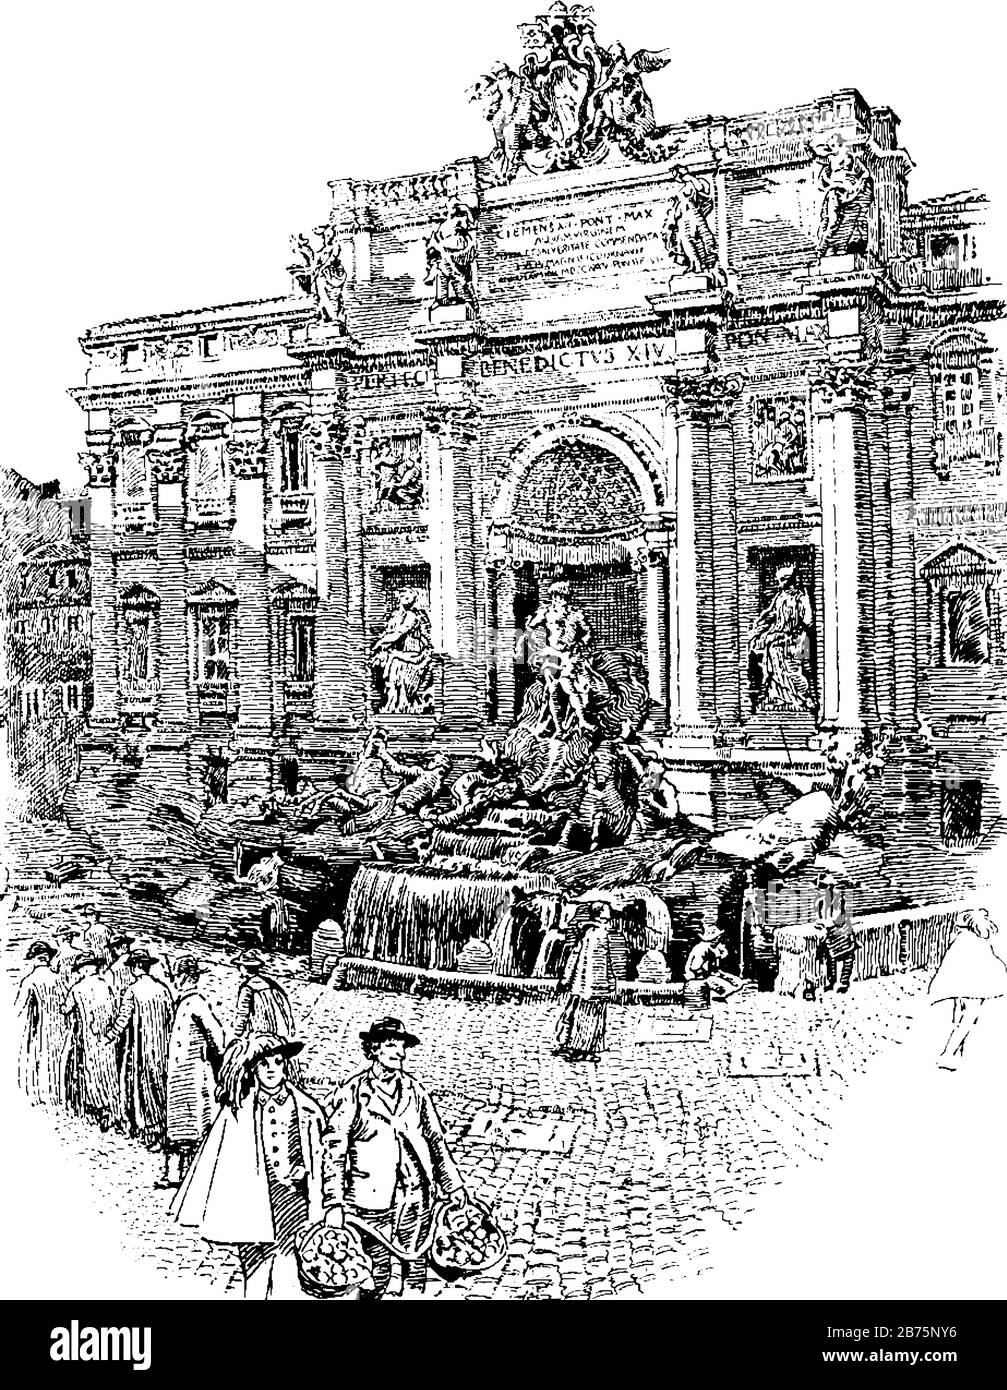 Trevi Fountain In Rome Italy Published In 1878 Stock Illustration   Download Image Now  Trevi Fountain 2015 Architecture  iStock